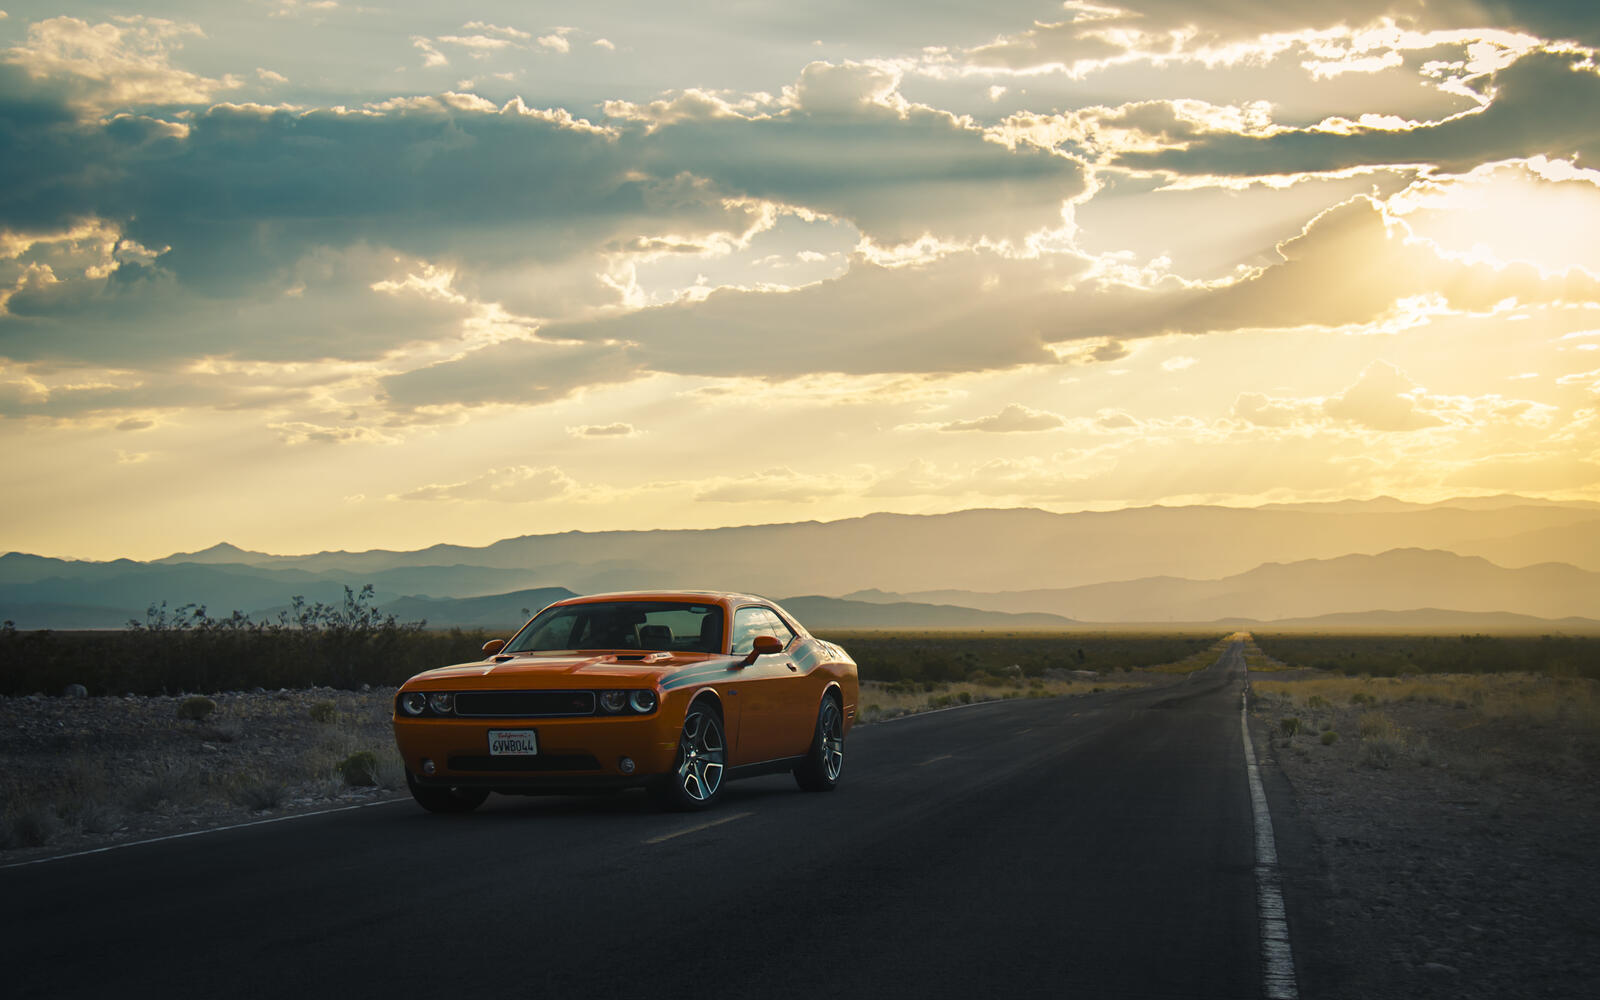 Free photo A picture of a Dodge Challenger on a deserted highway.